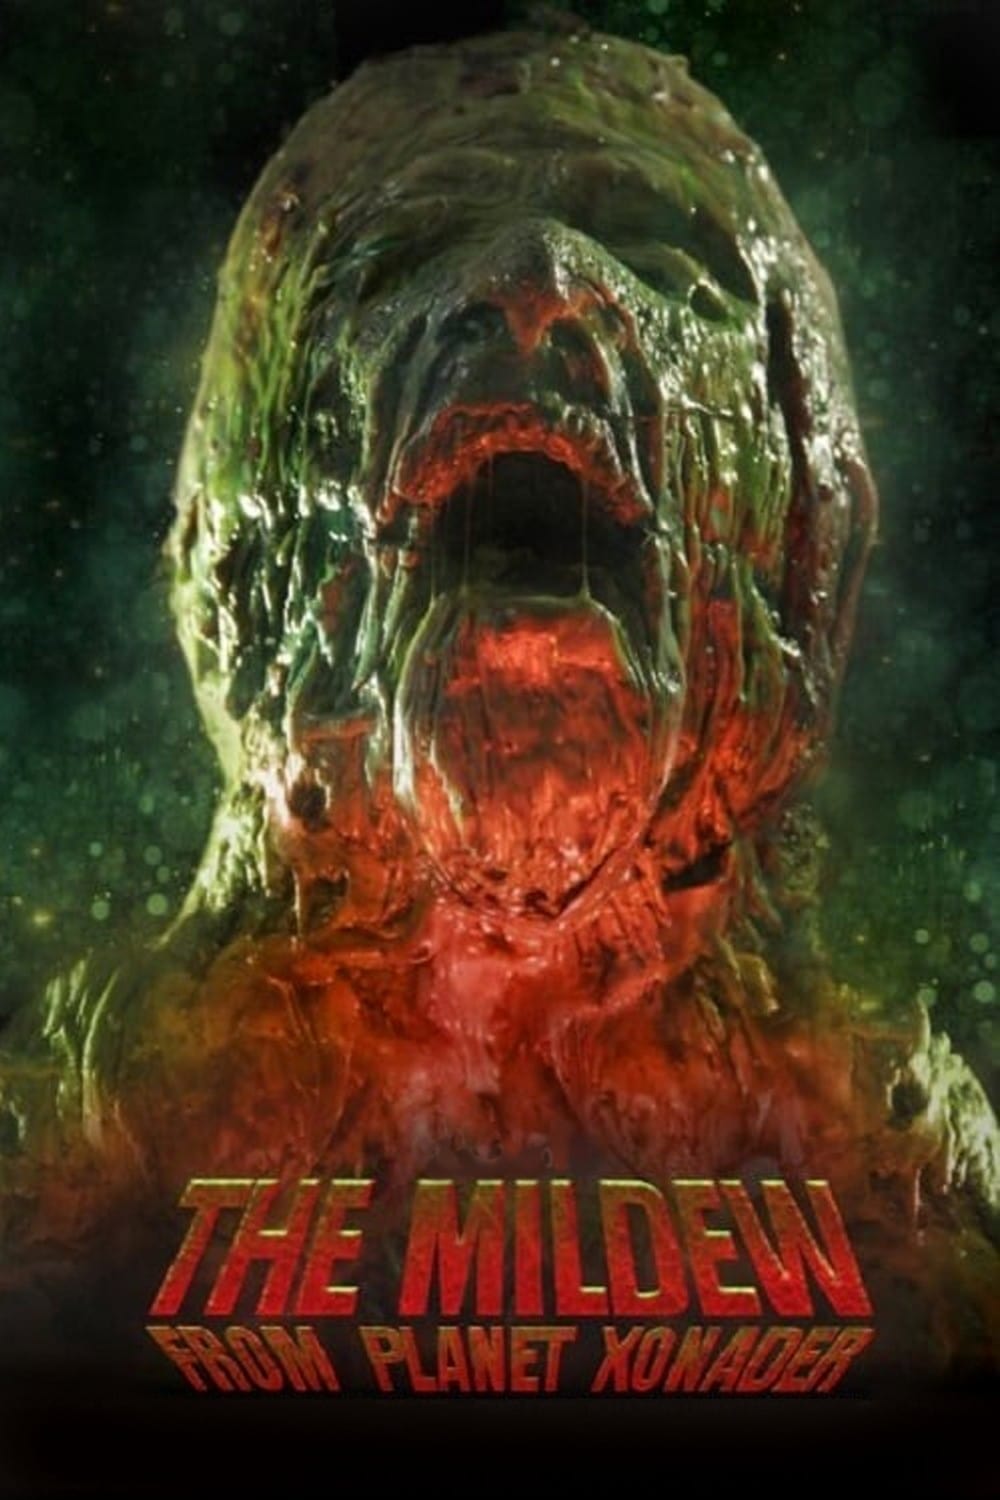 The Mildew from Planet Xonader streaming